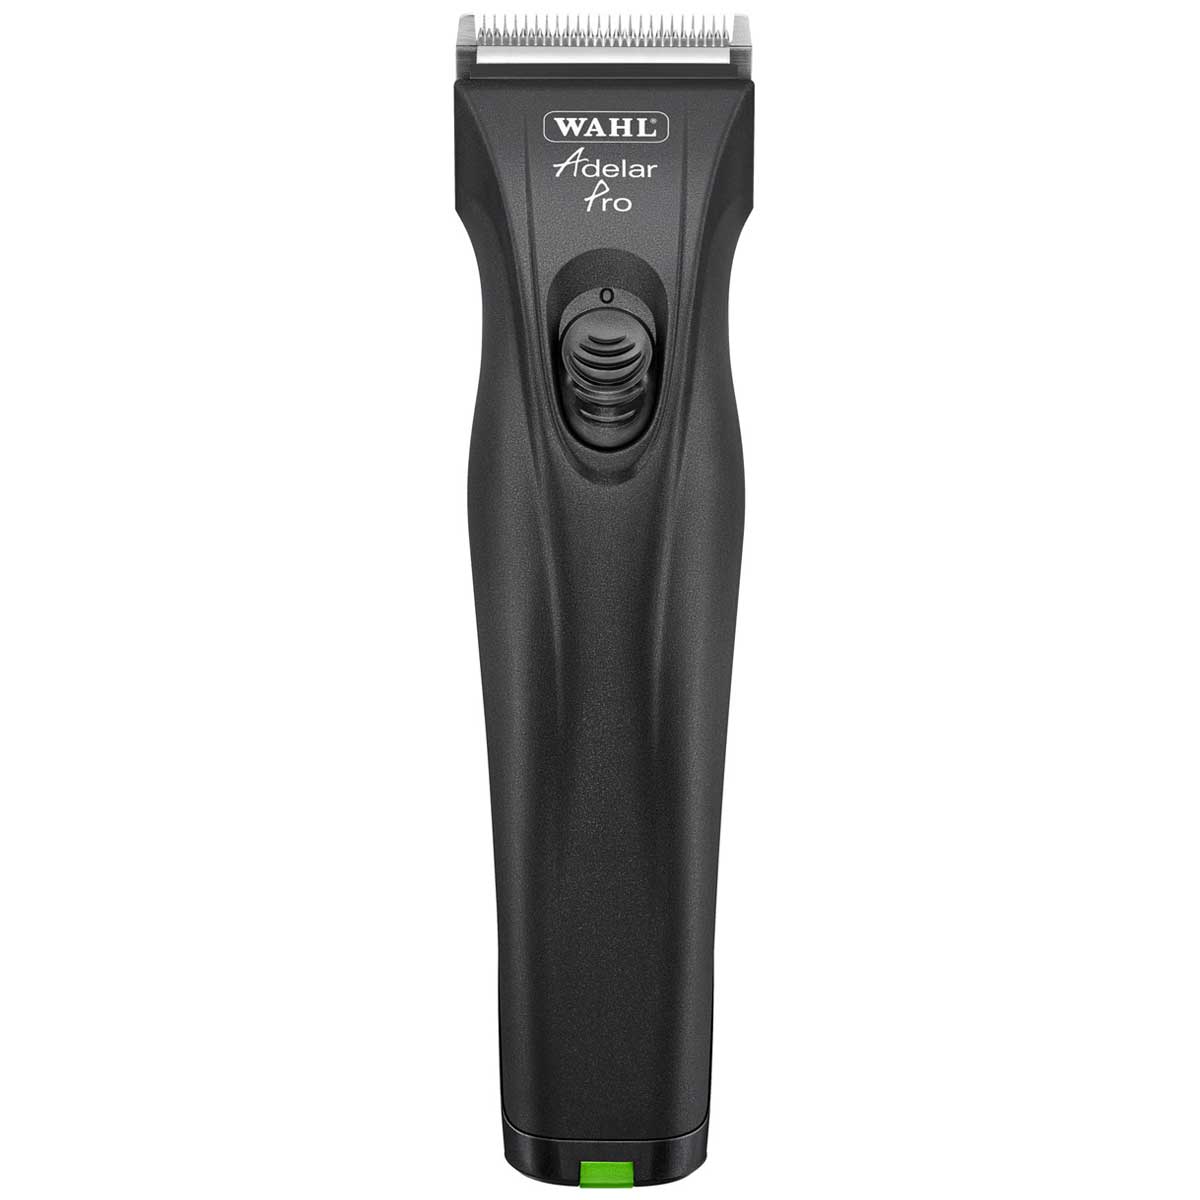 Wahl Adelar Pro Horse Clipper 2x battery with attachment comb set